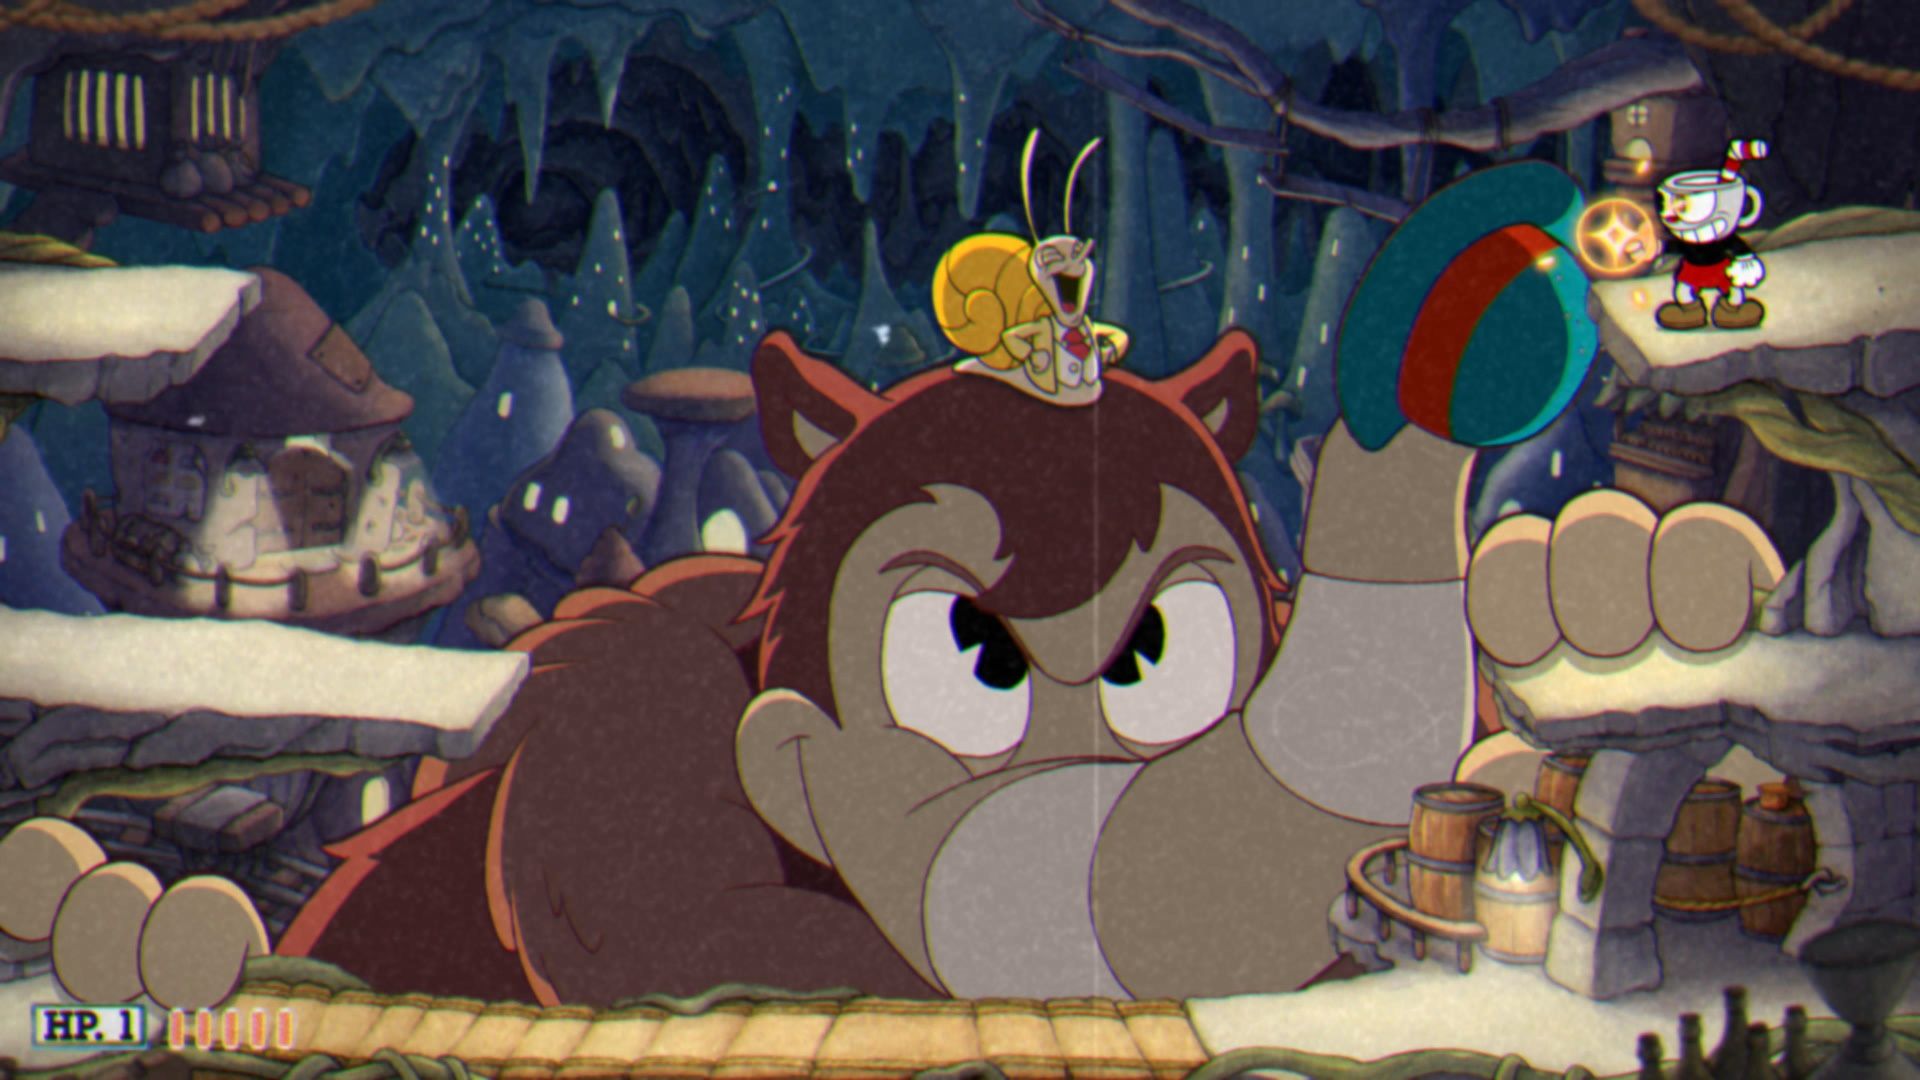 Cuphead The Delicious Course, Phase 3, Snail Boss reveals himself